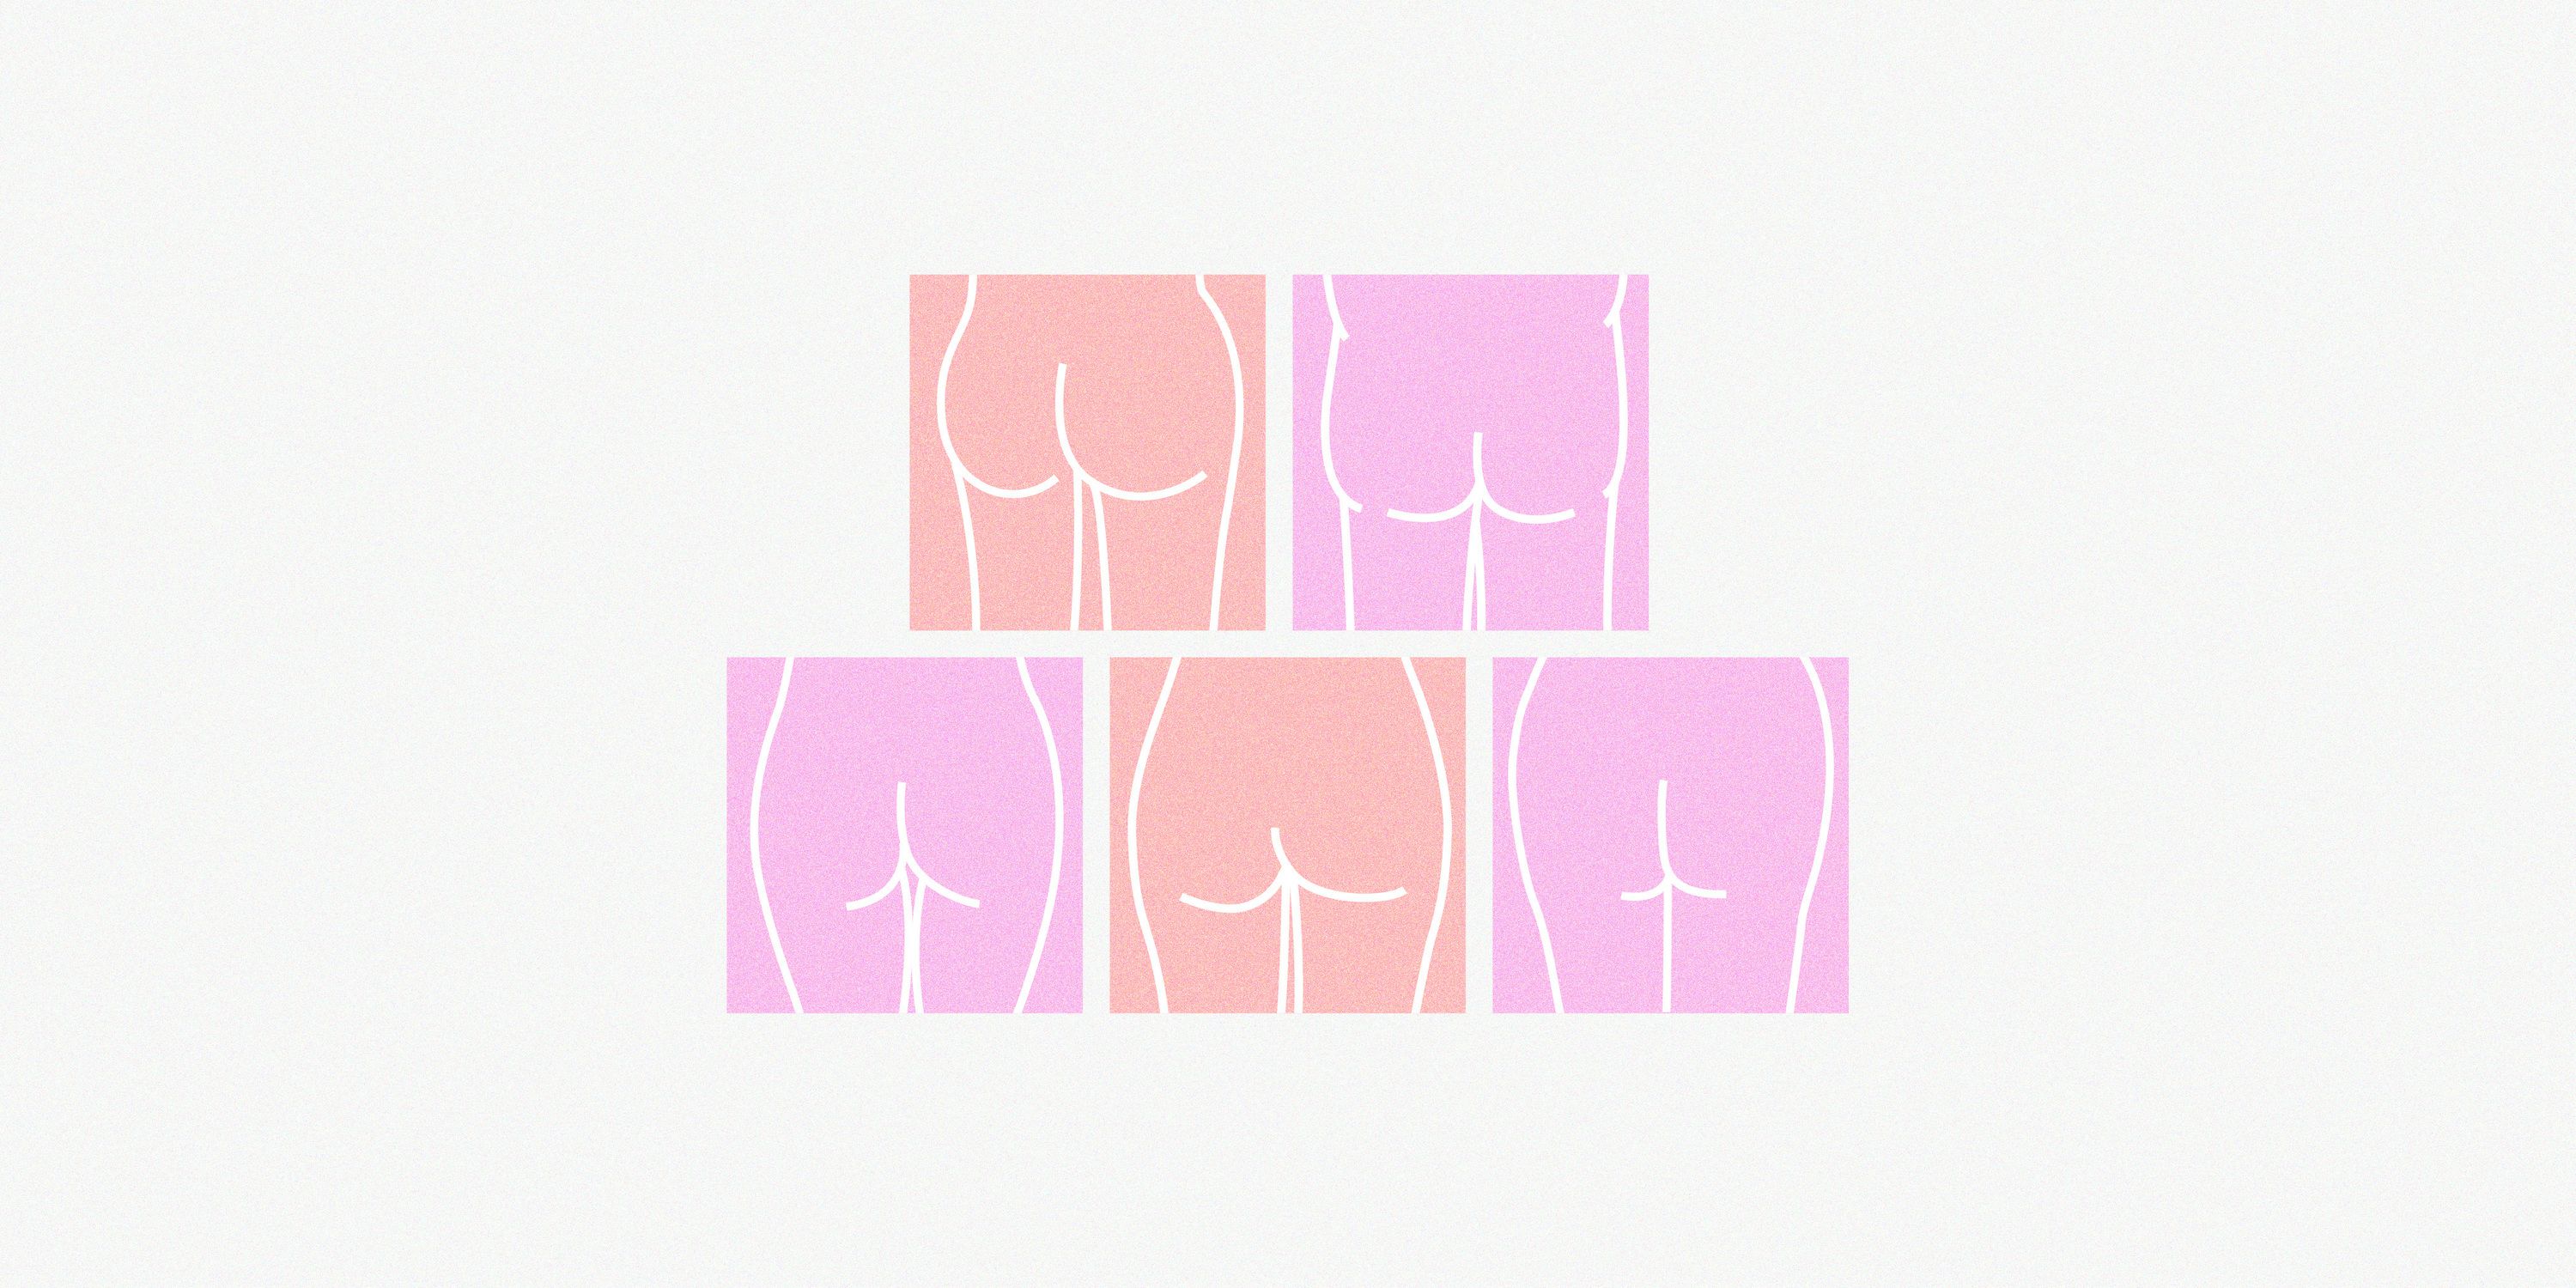 5 Different Types of Butt Shapes